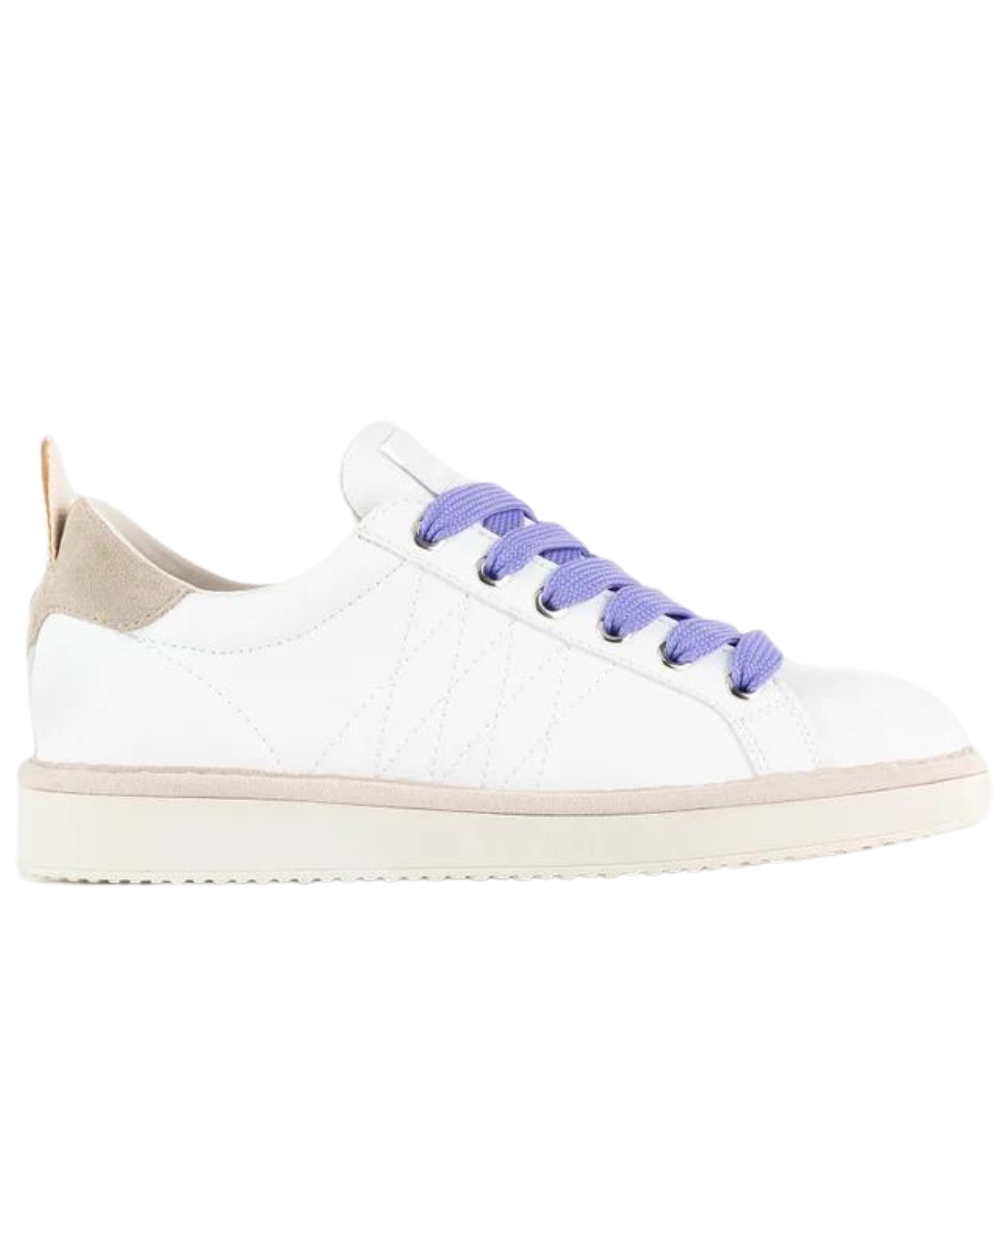 PANCHIC WHITE VIOLET P01 sneakers basse donna in microfibra e suede